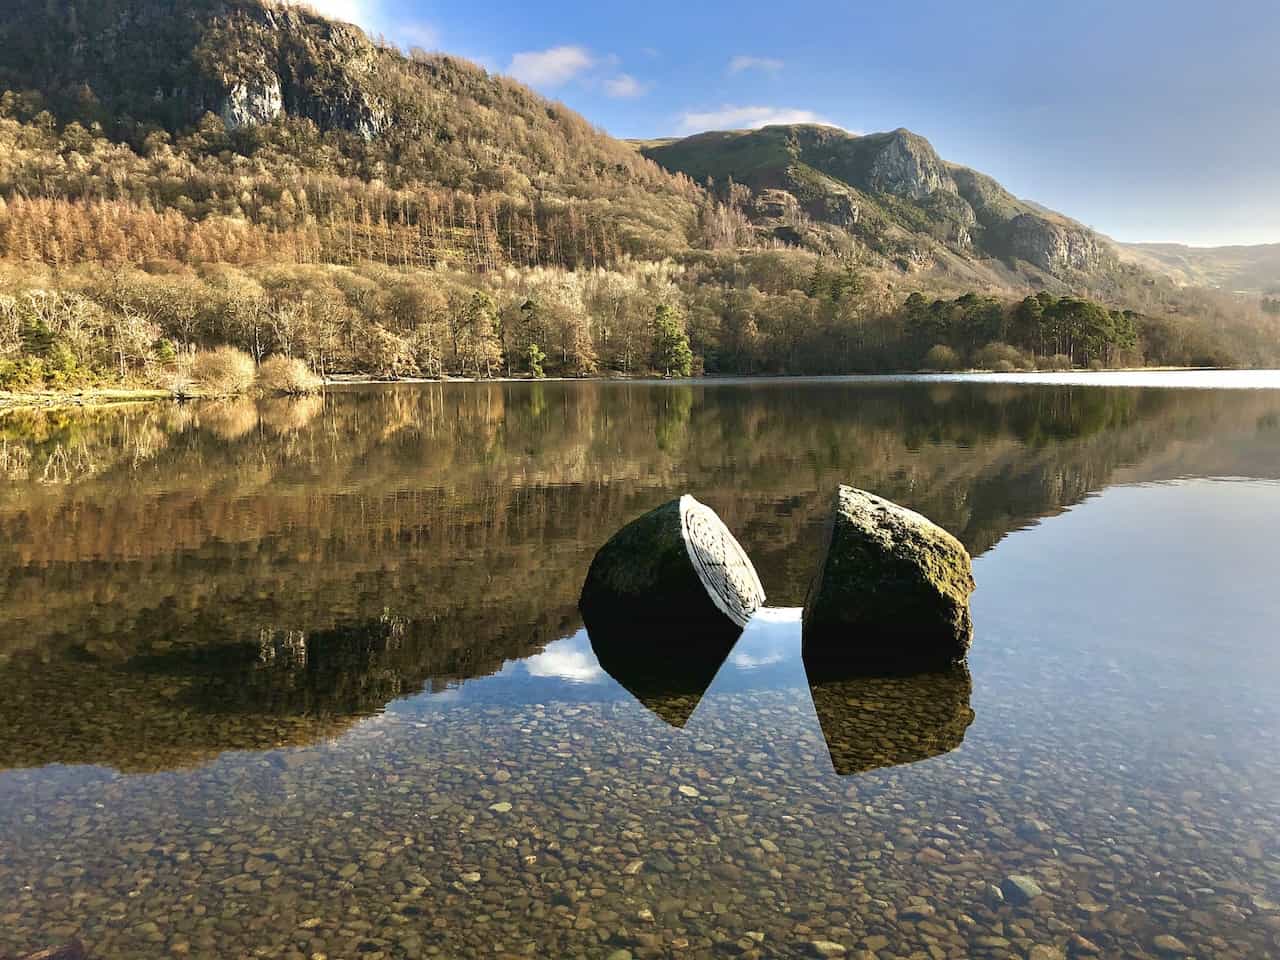 The Centenary Stone in Calfclose Bay, a large split boulder commemorating 100 years of the National Trust in the Lake District. This intriguing landmark is a highlight on the Derwent Water circular walk.